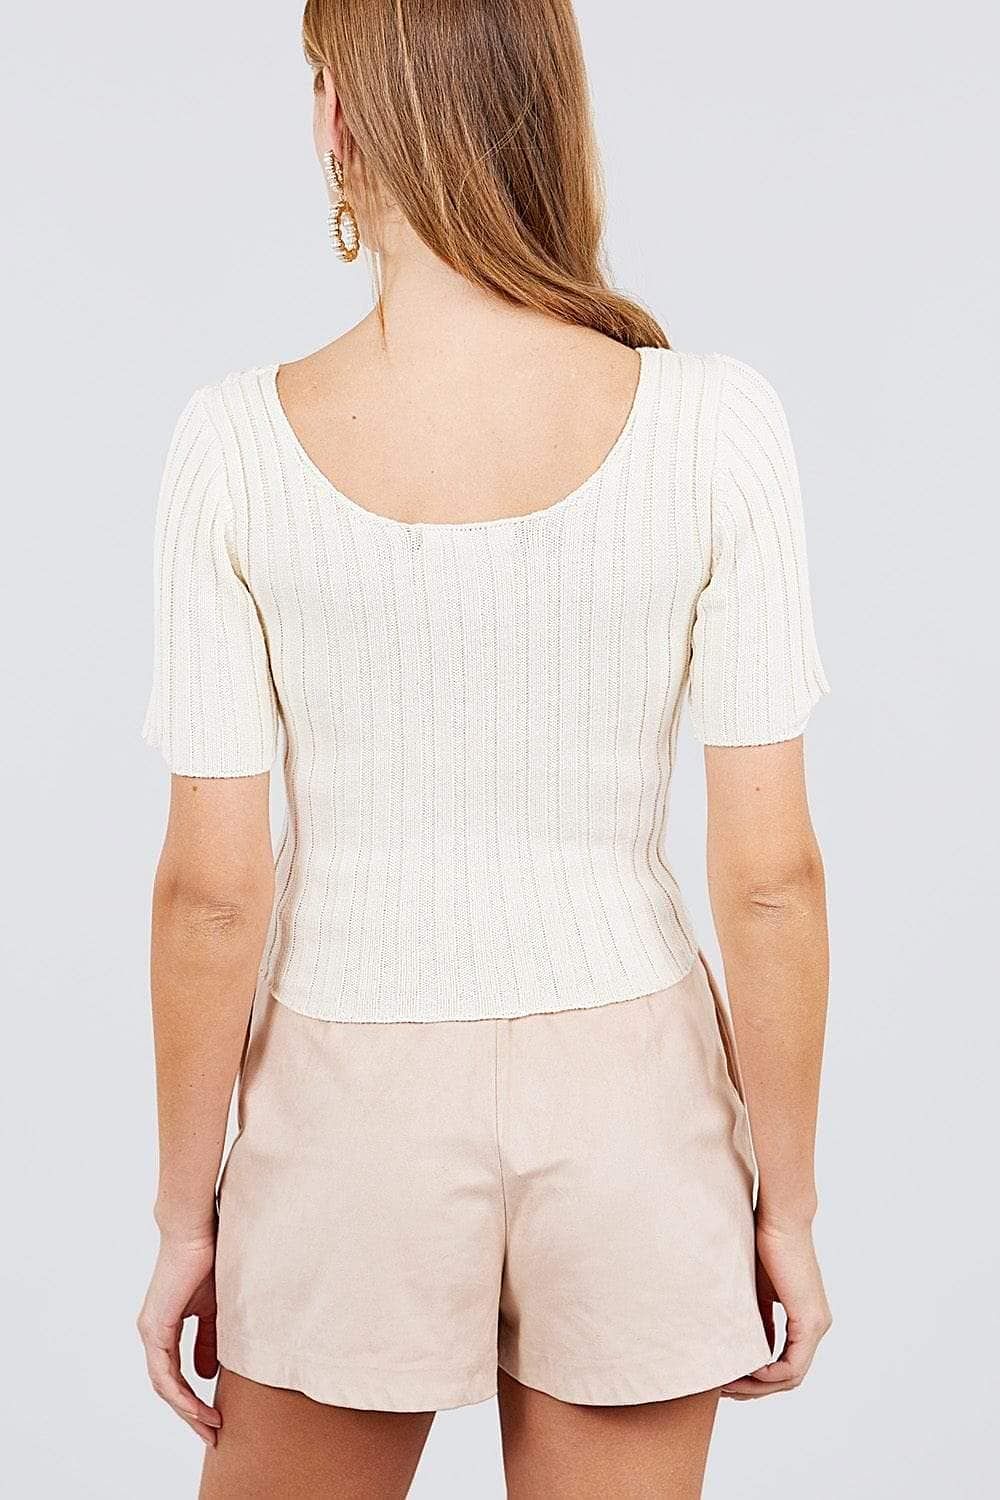 Off White Short Sleeve Rib Knitted Sweater - Shopping Therapy Tops